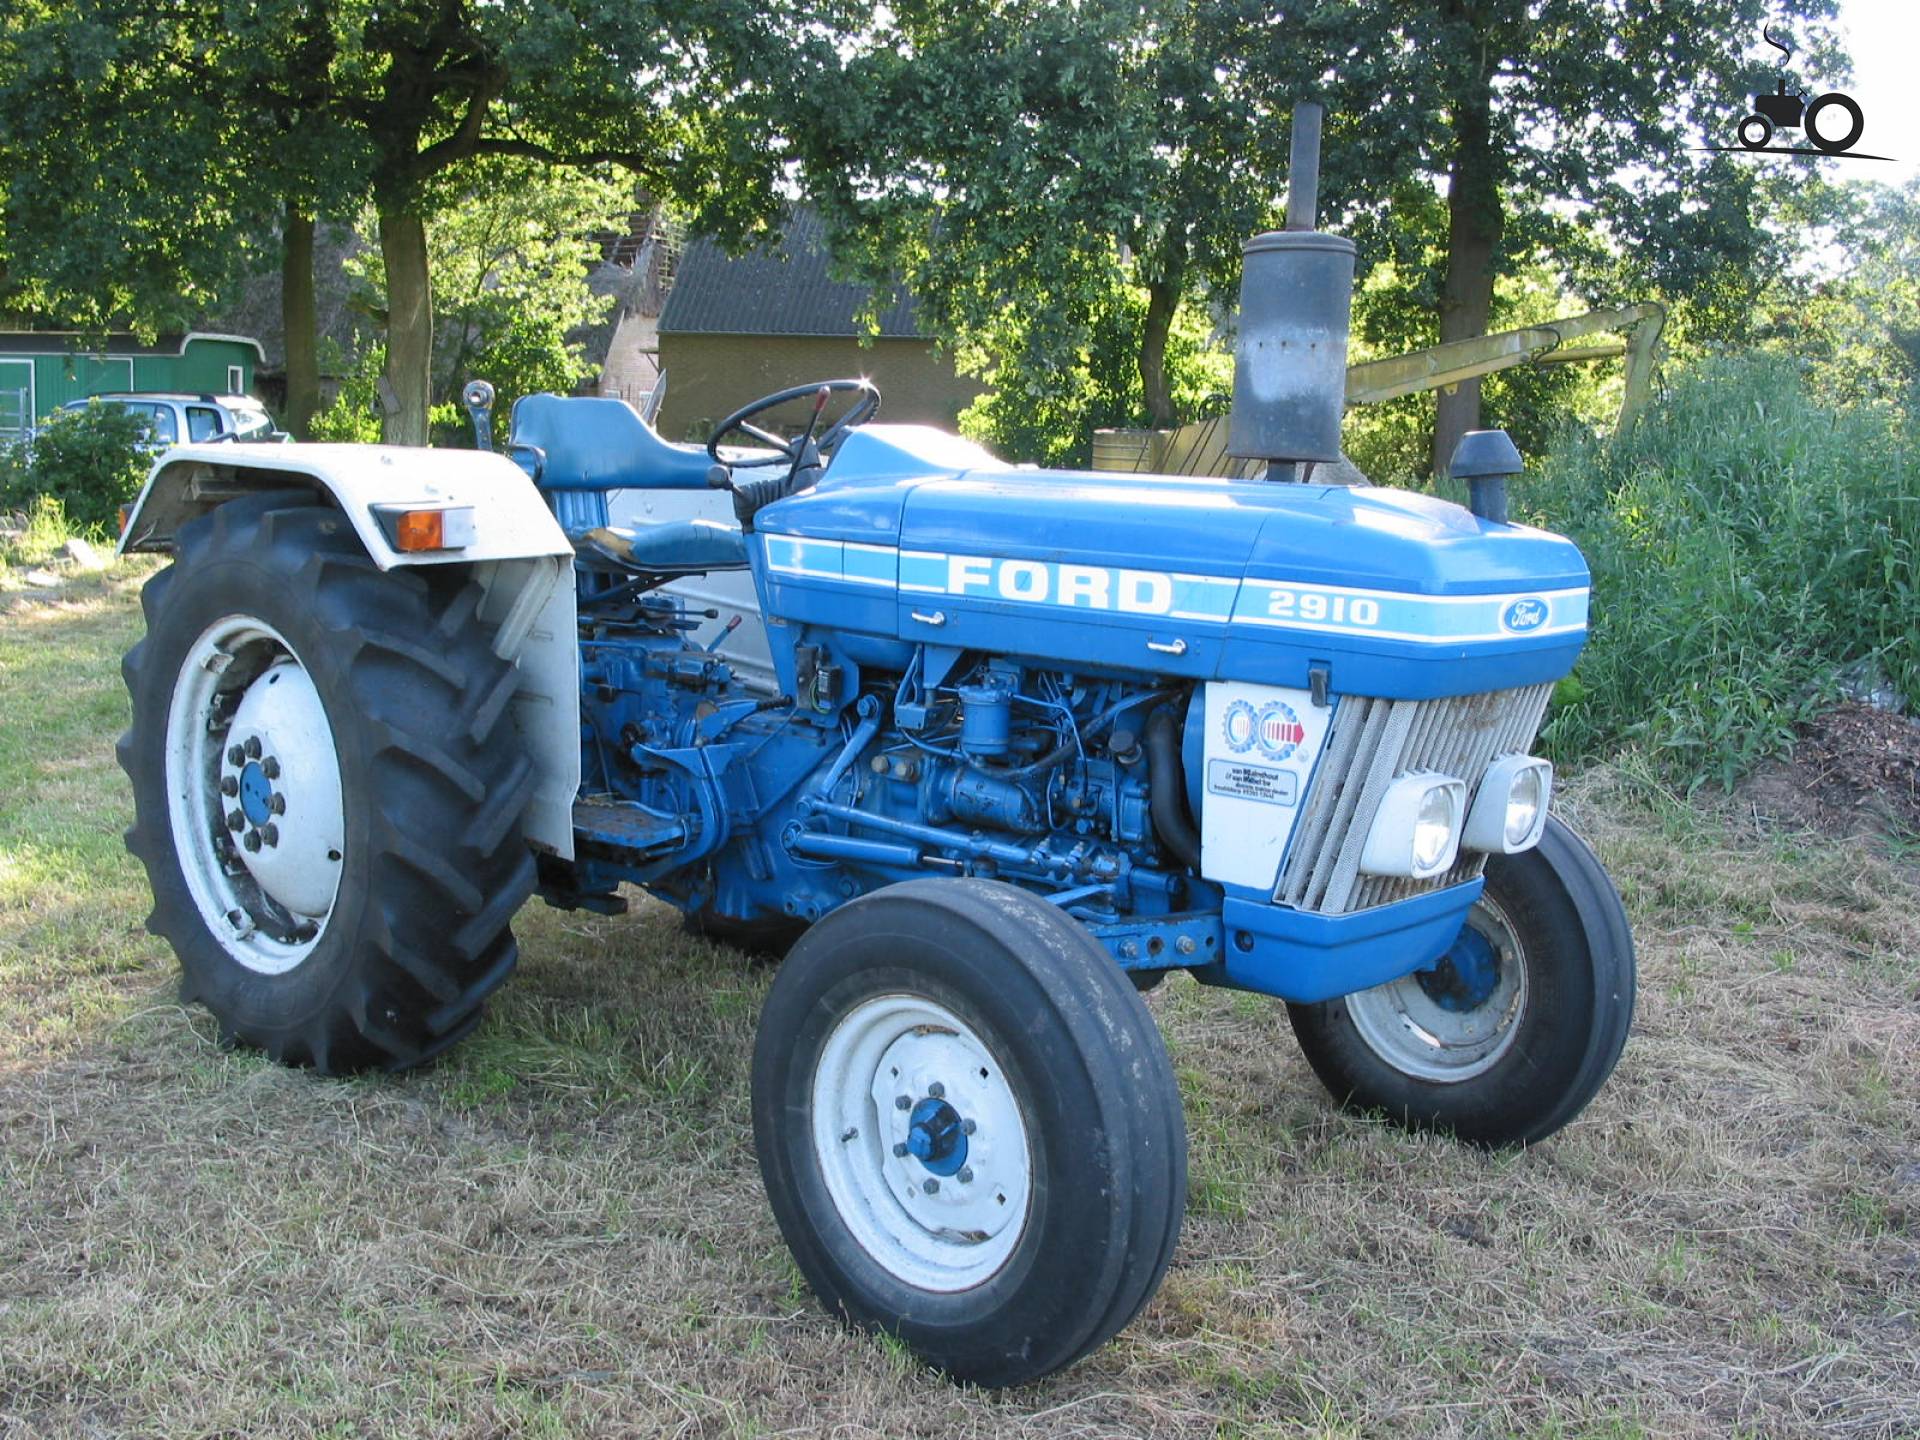 Ford 2910 Specs and data - Everything about the Ford 2910